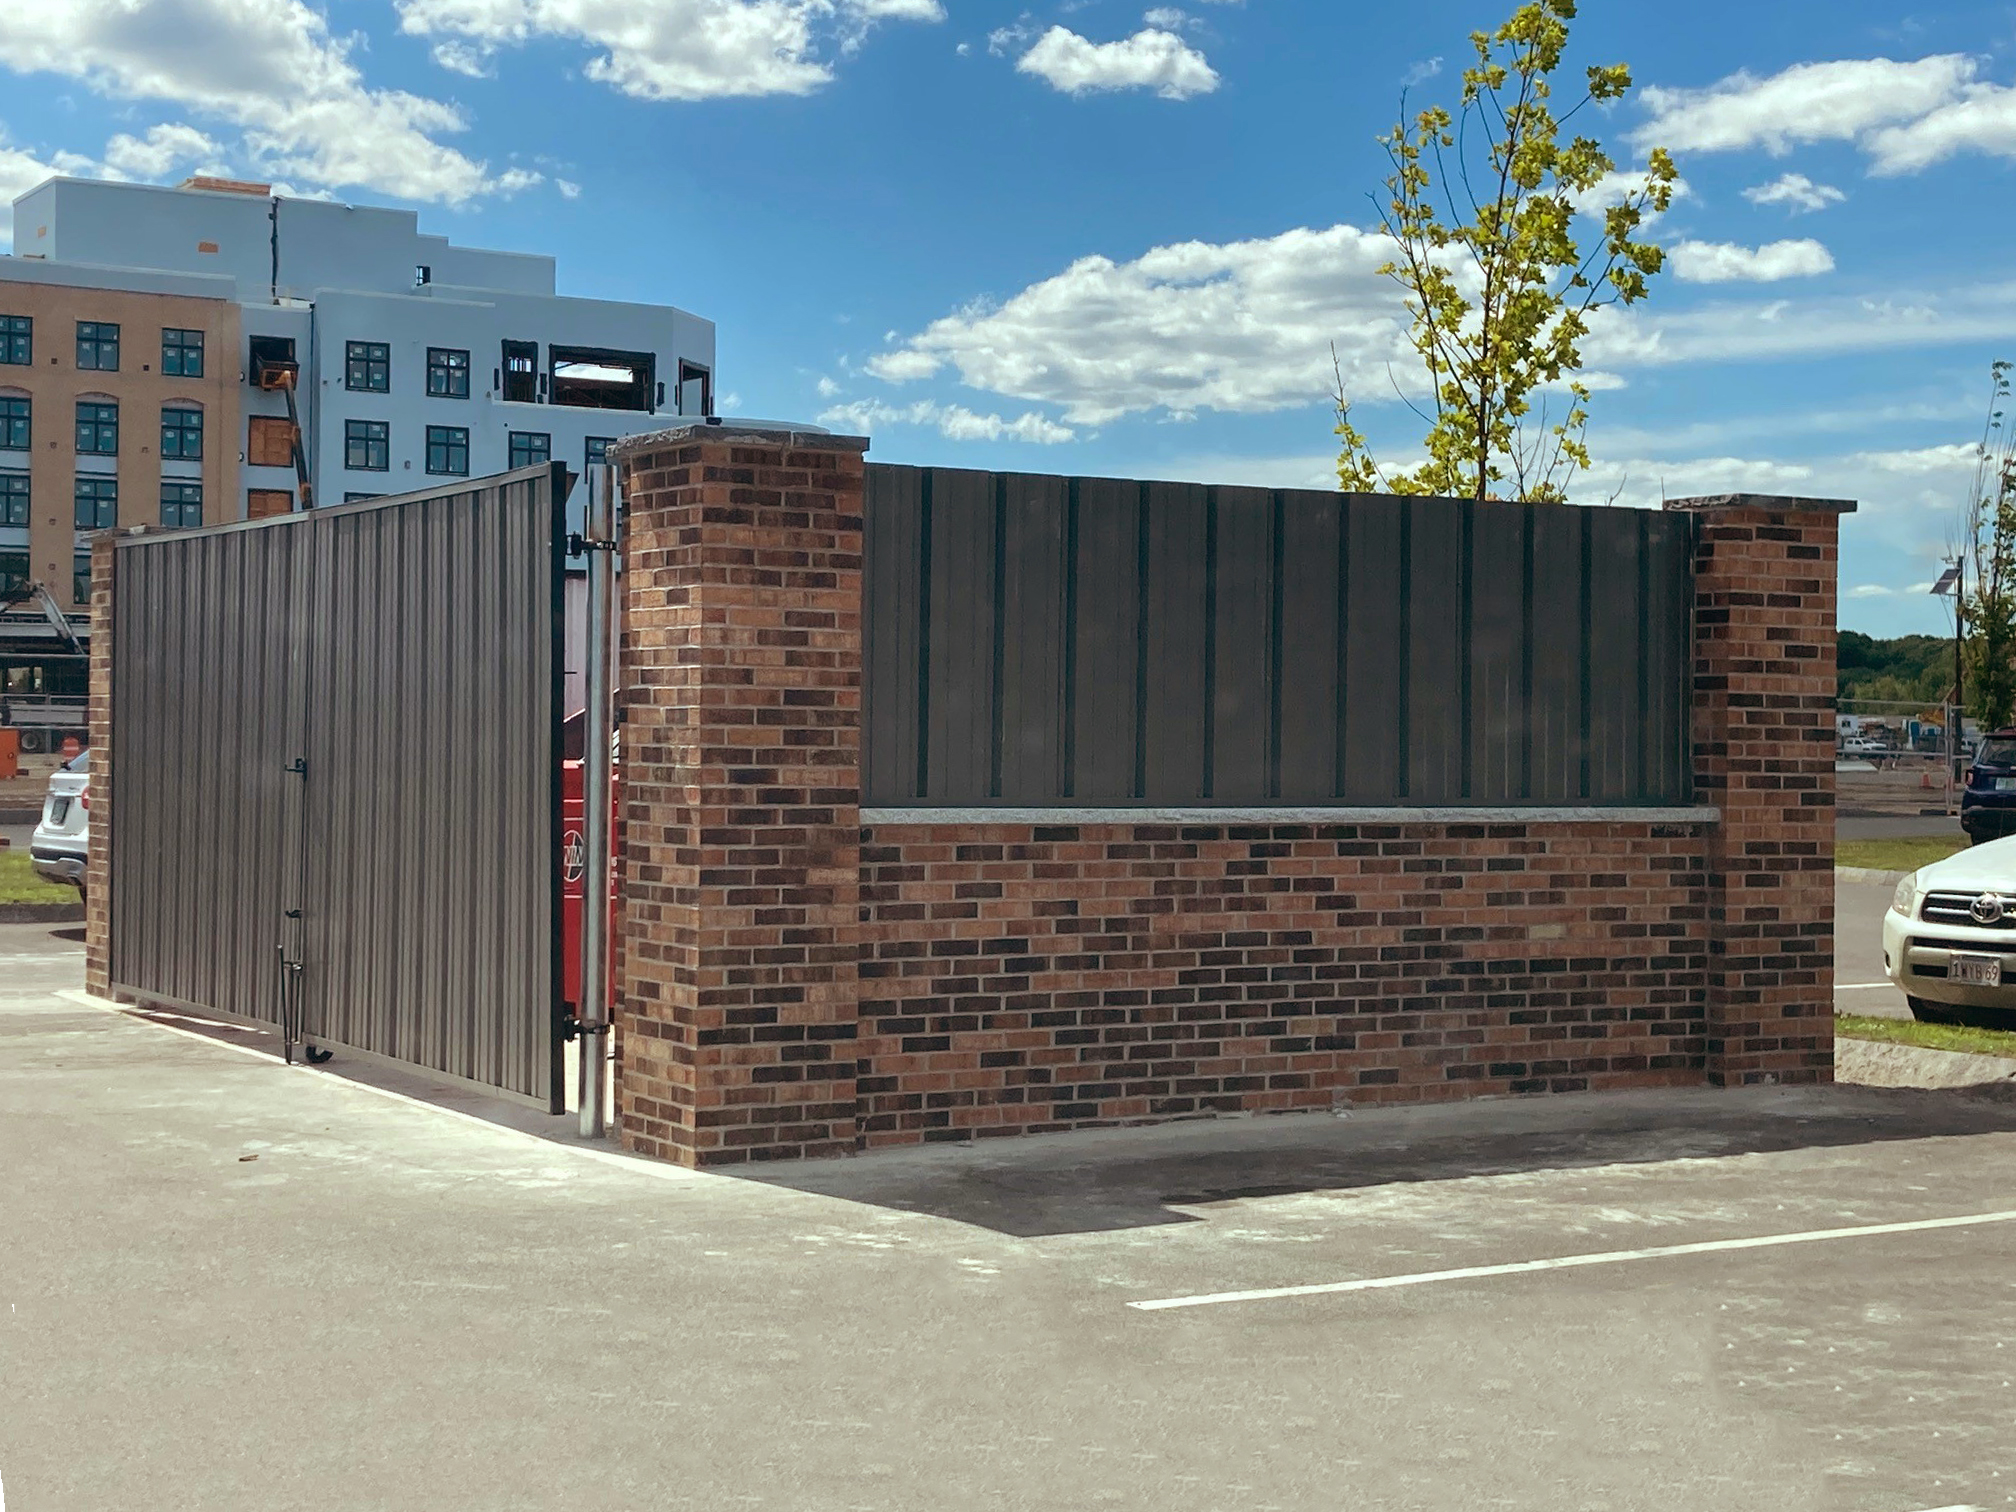 Saving on Commercial Dumpster Enclosure Costs with Choice Enclosures’ Modular Design